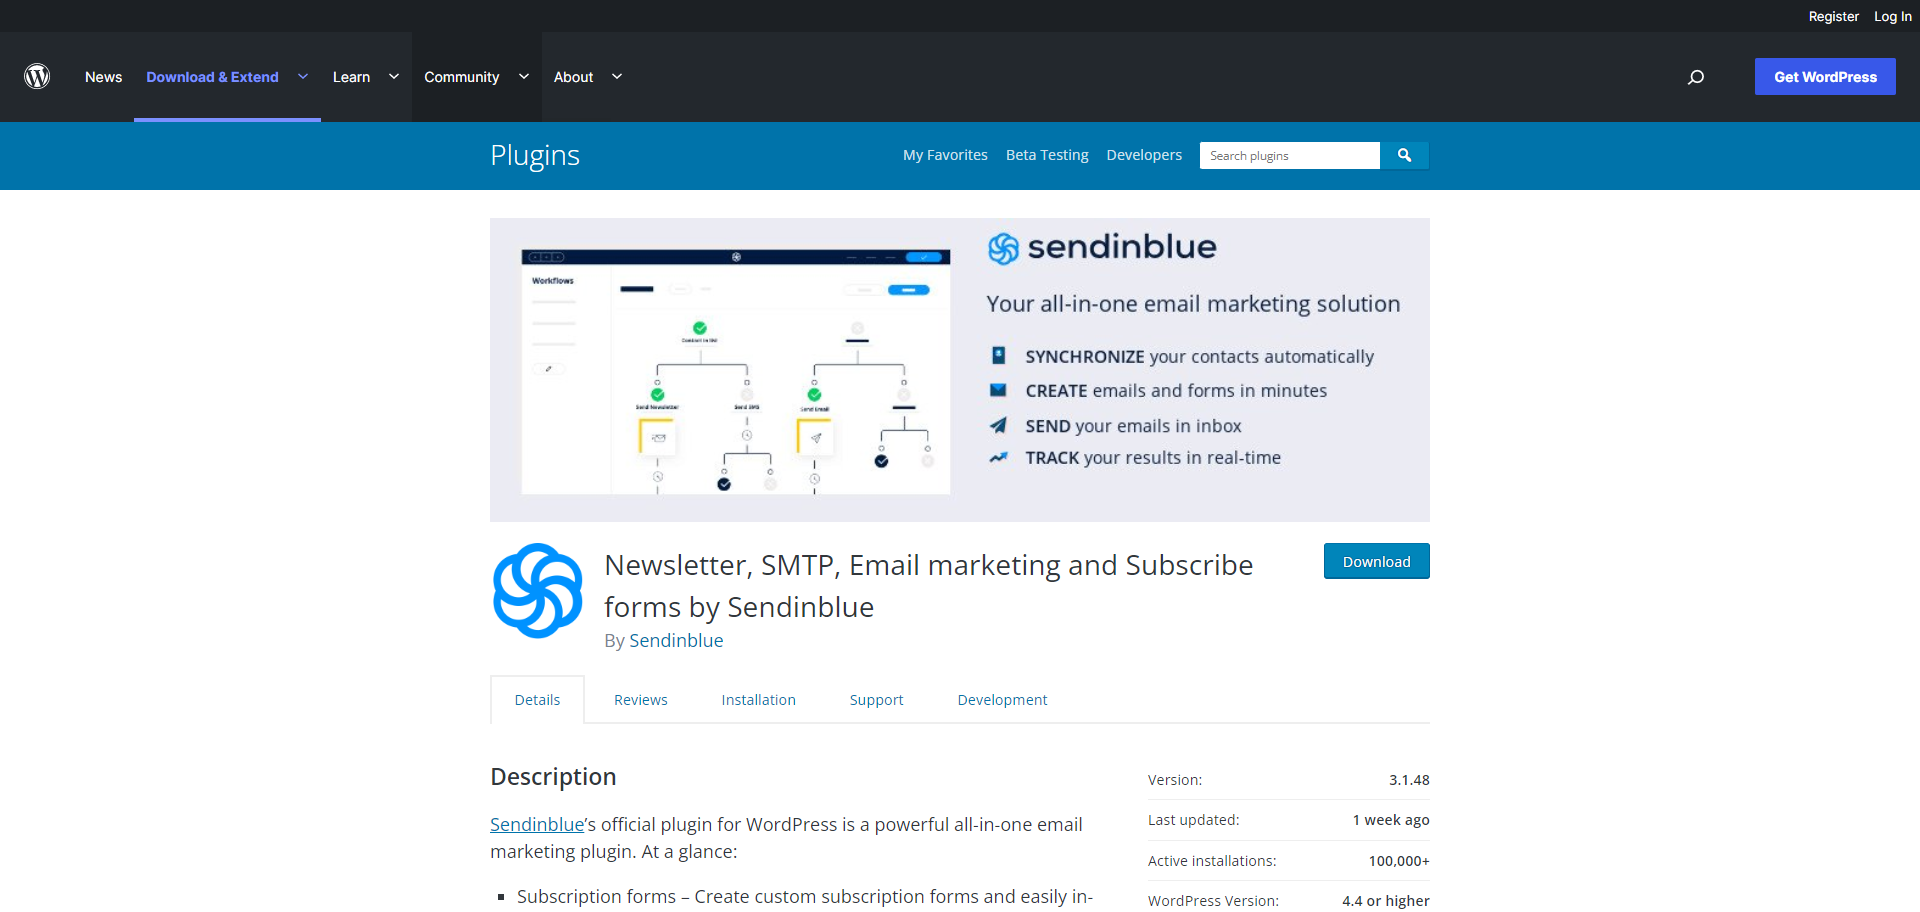 Newsletter, SMTP, Email marketing and Subscribe forms by Sendinblue